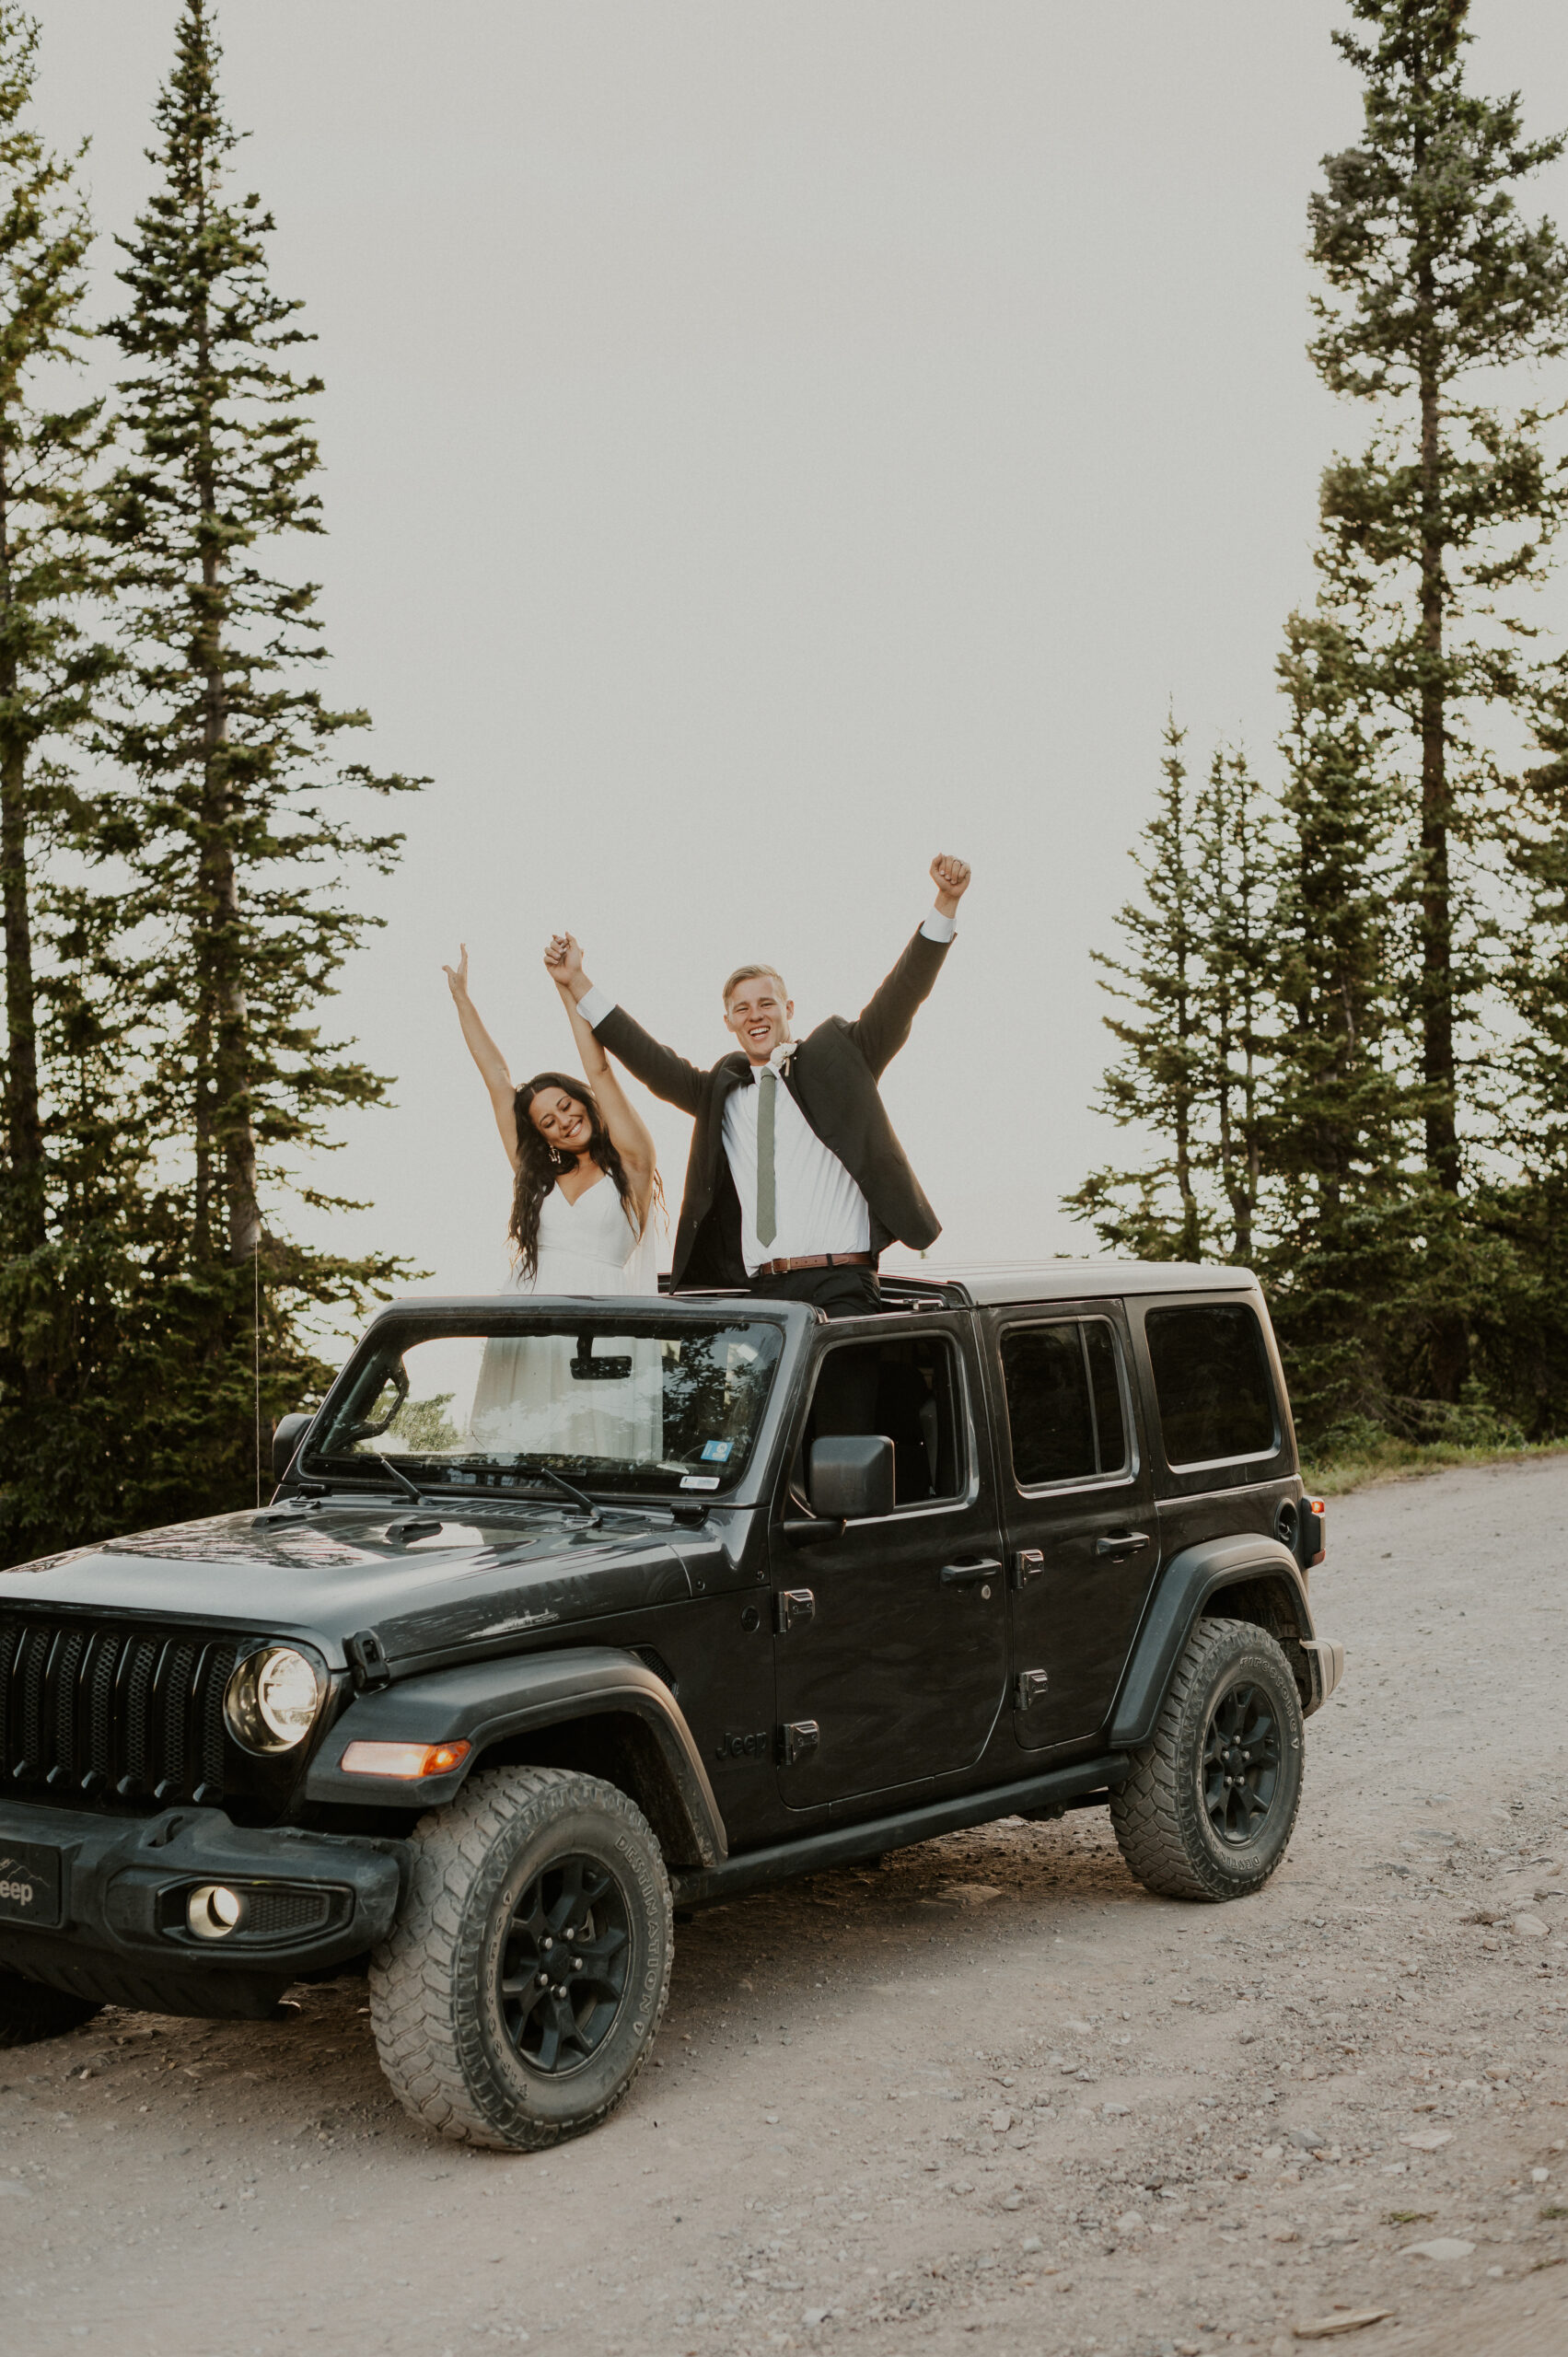 A couple cheering during their jeeping elopement in Crested Butte, Colorado